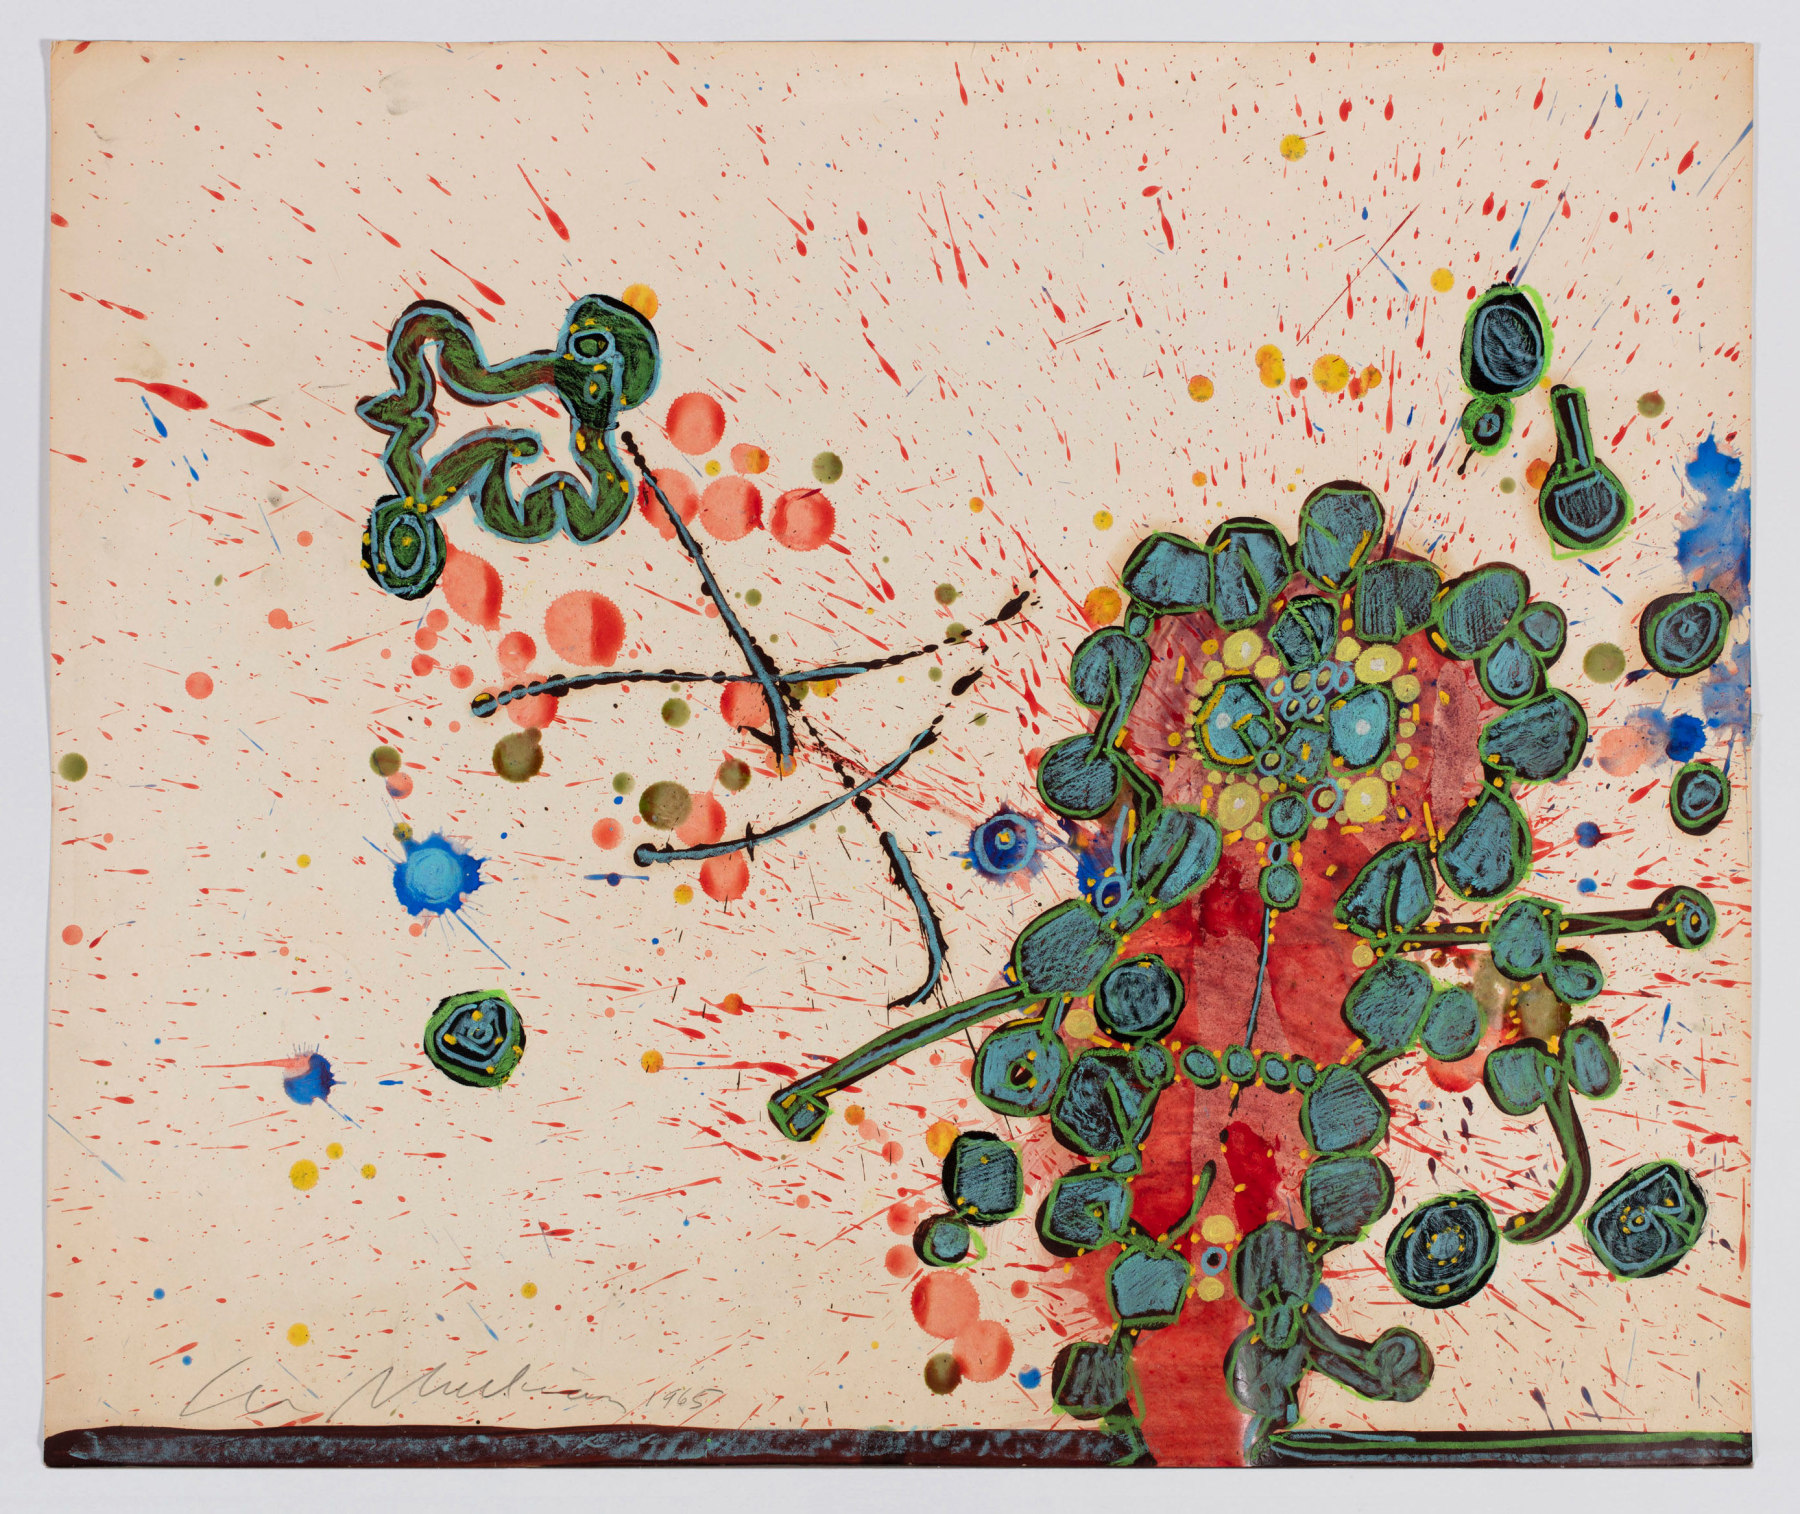 Image of LEE MULLICAN's Angry act, 1965